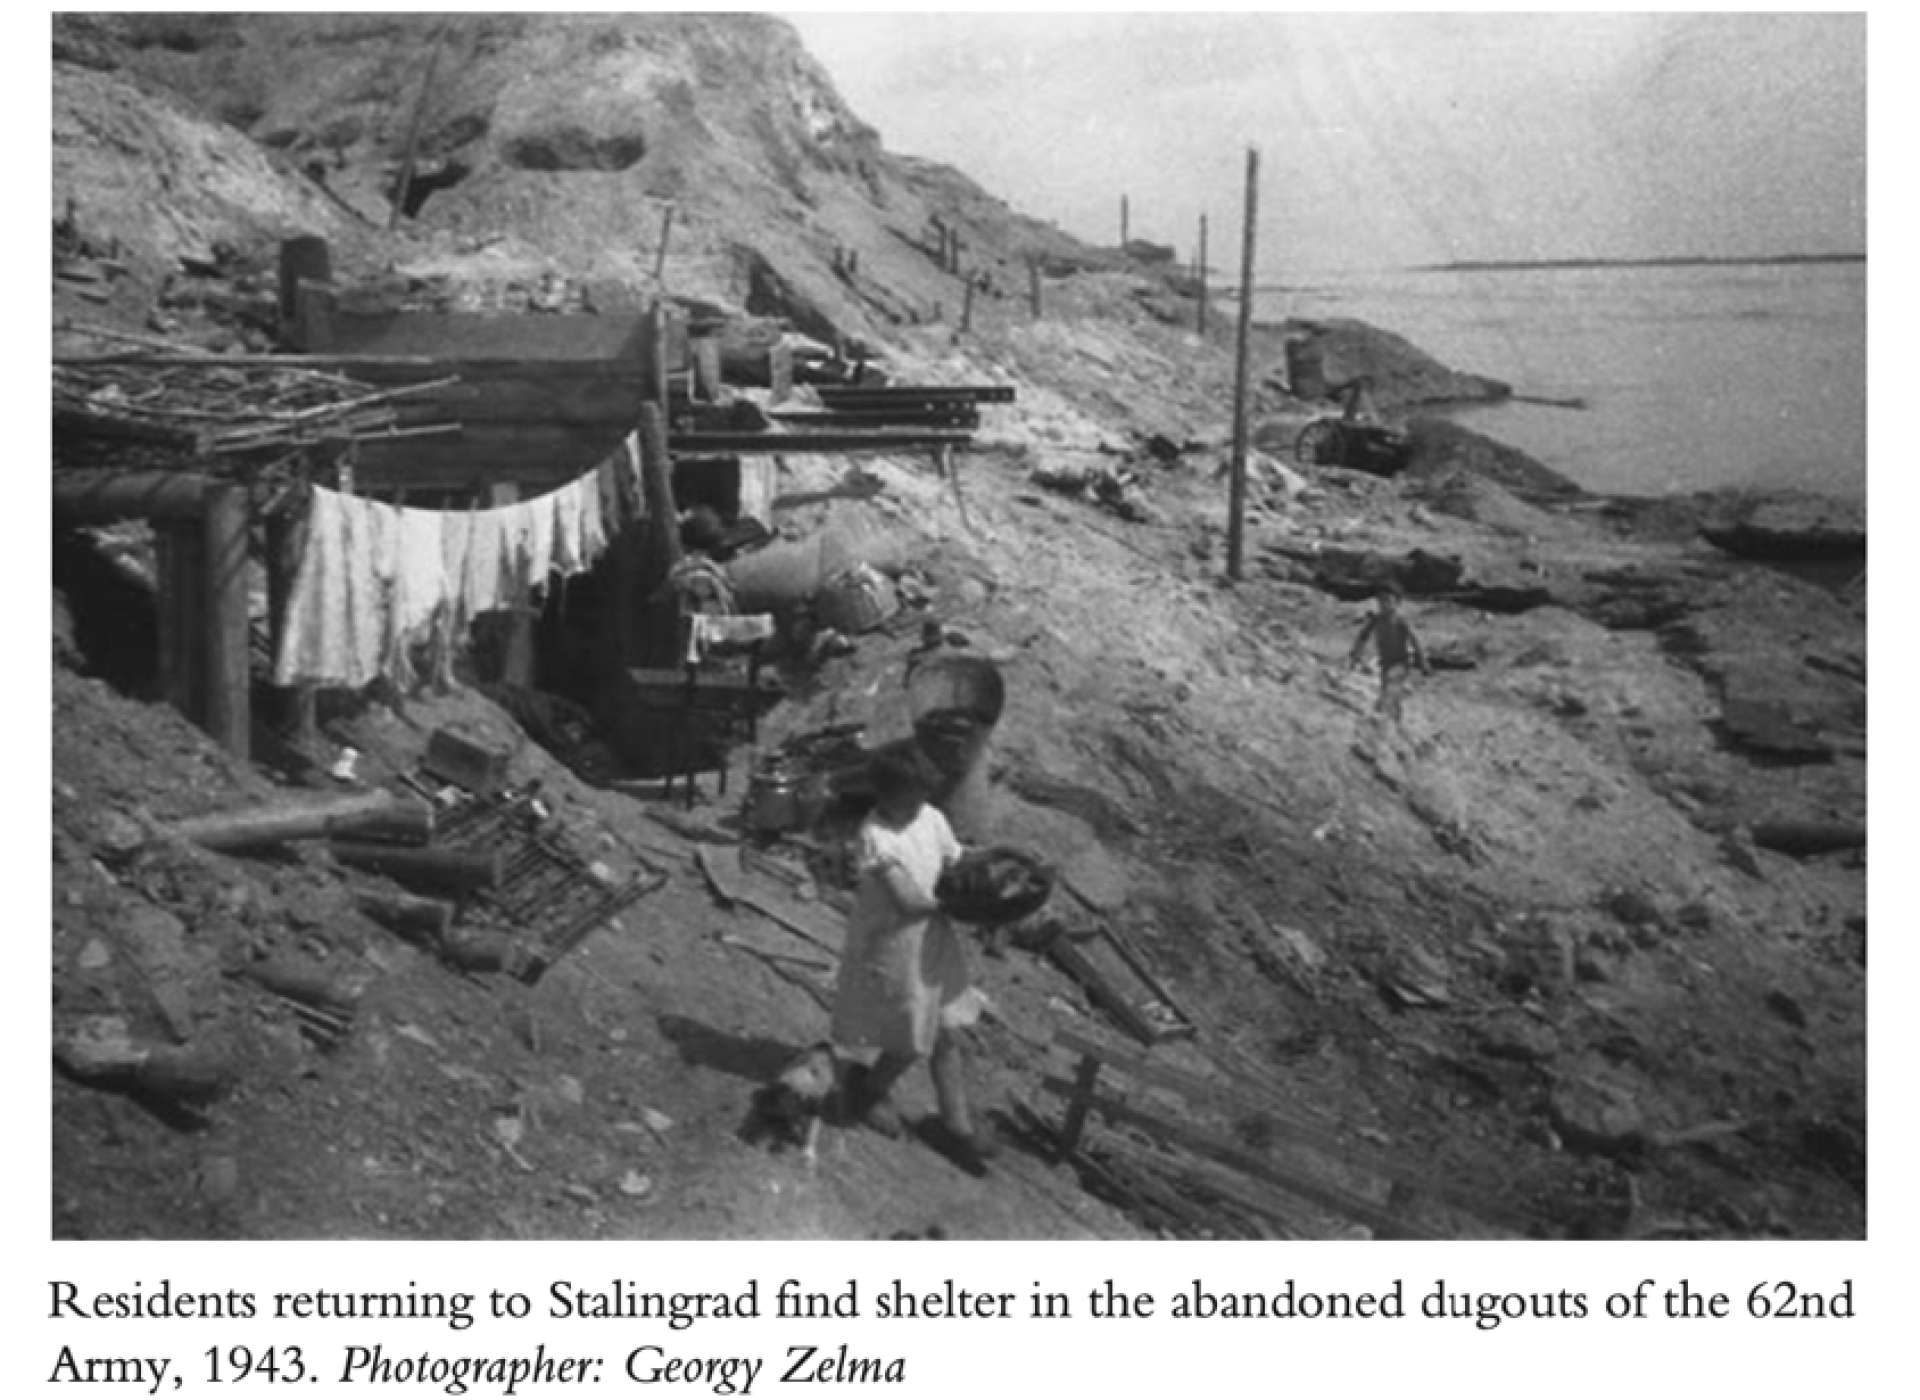 Residents returning to Stalingrad find shelter in the abandoned dugouts of the 62nd Army, 1943. Photographer: Georgy Zelma